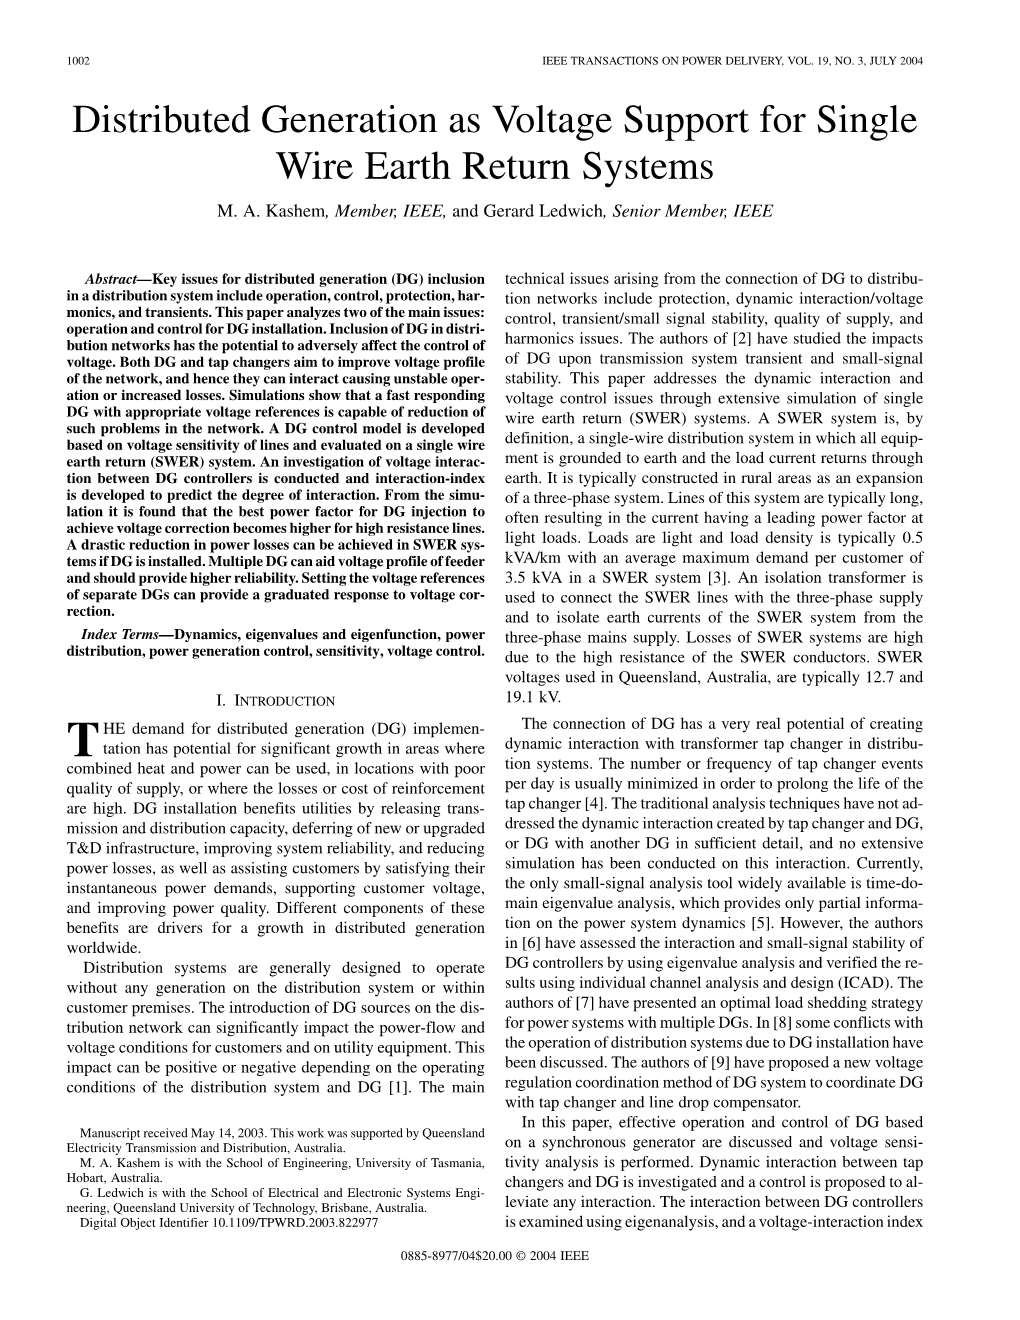 Distributed Generation As Voltage Support for Single Wire Earth Return Systems M